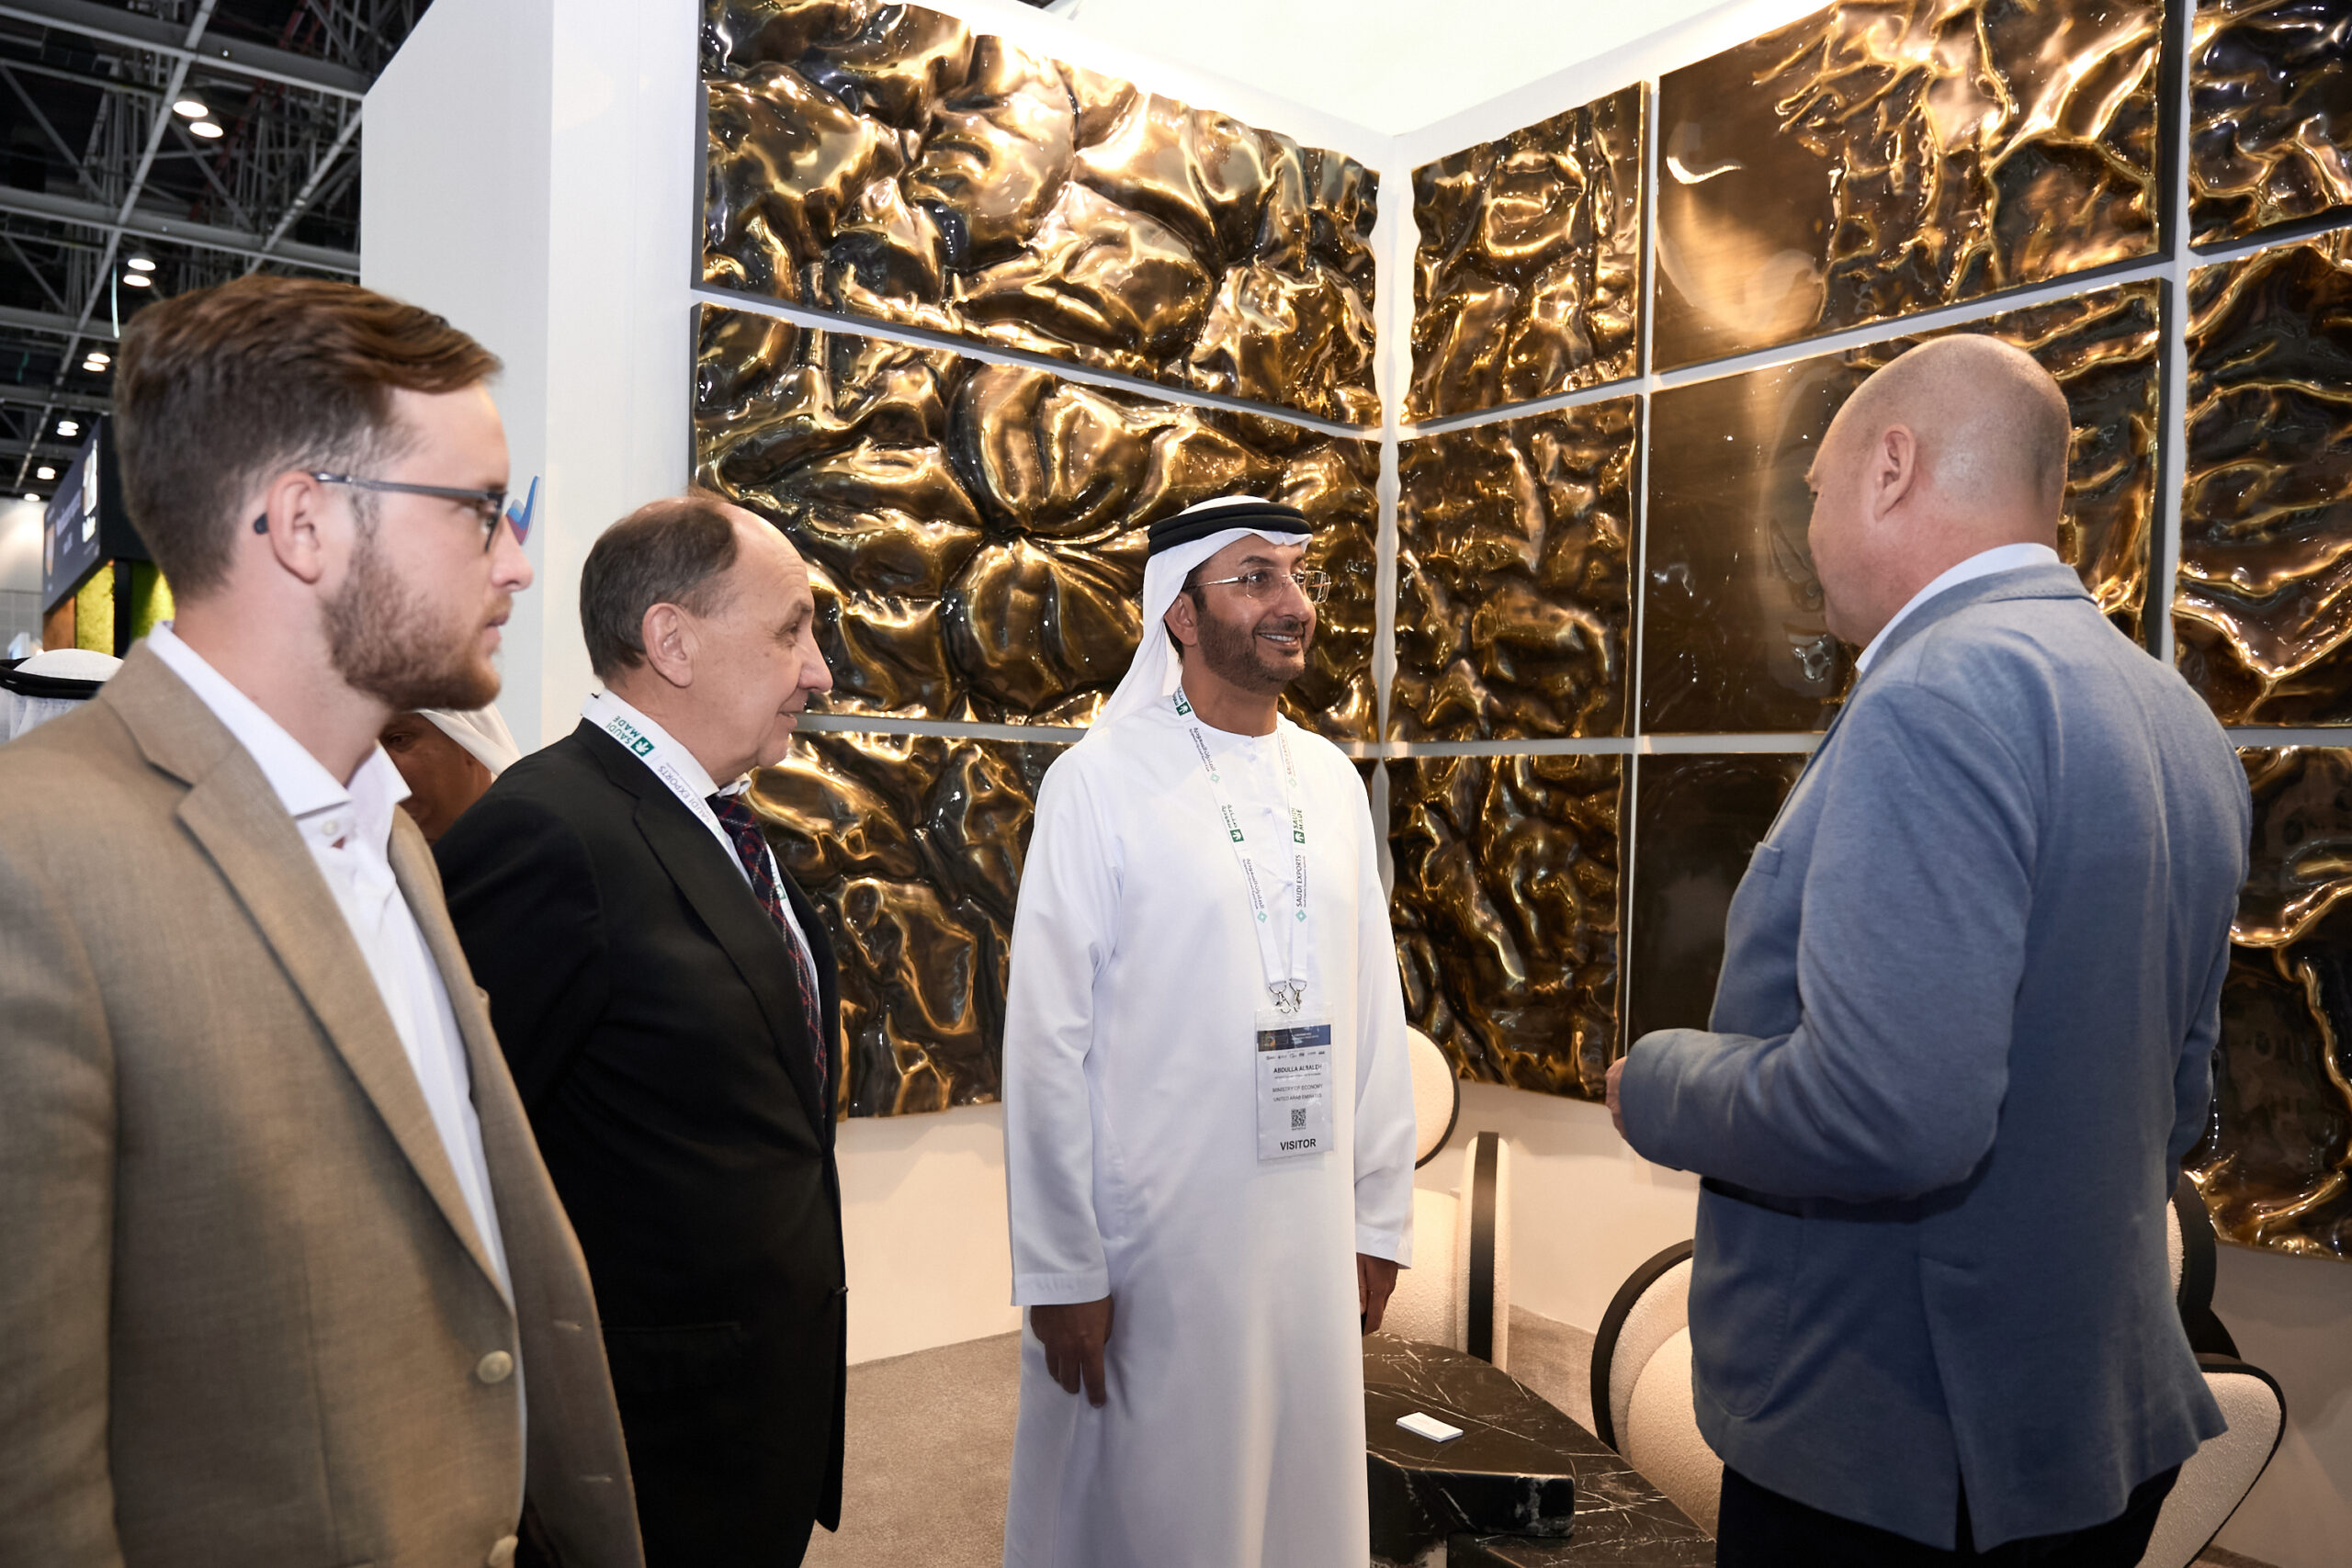 Metalworkshop attends construction industry highlight, The BIG 5 in Dubai